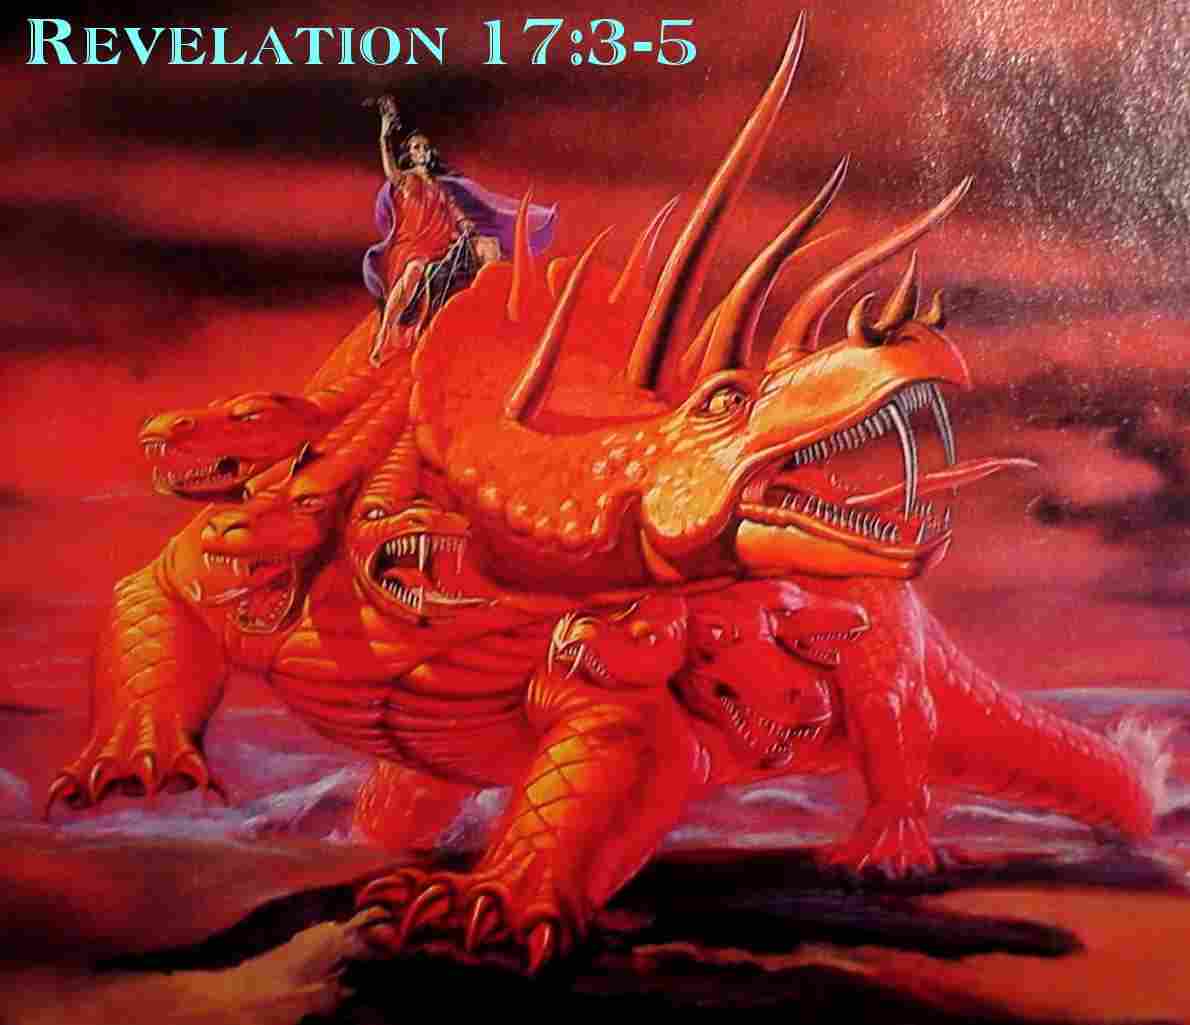 The great harlot church riding the beast goverments of Daniel & Revelation